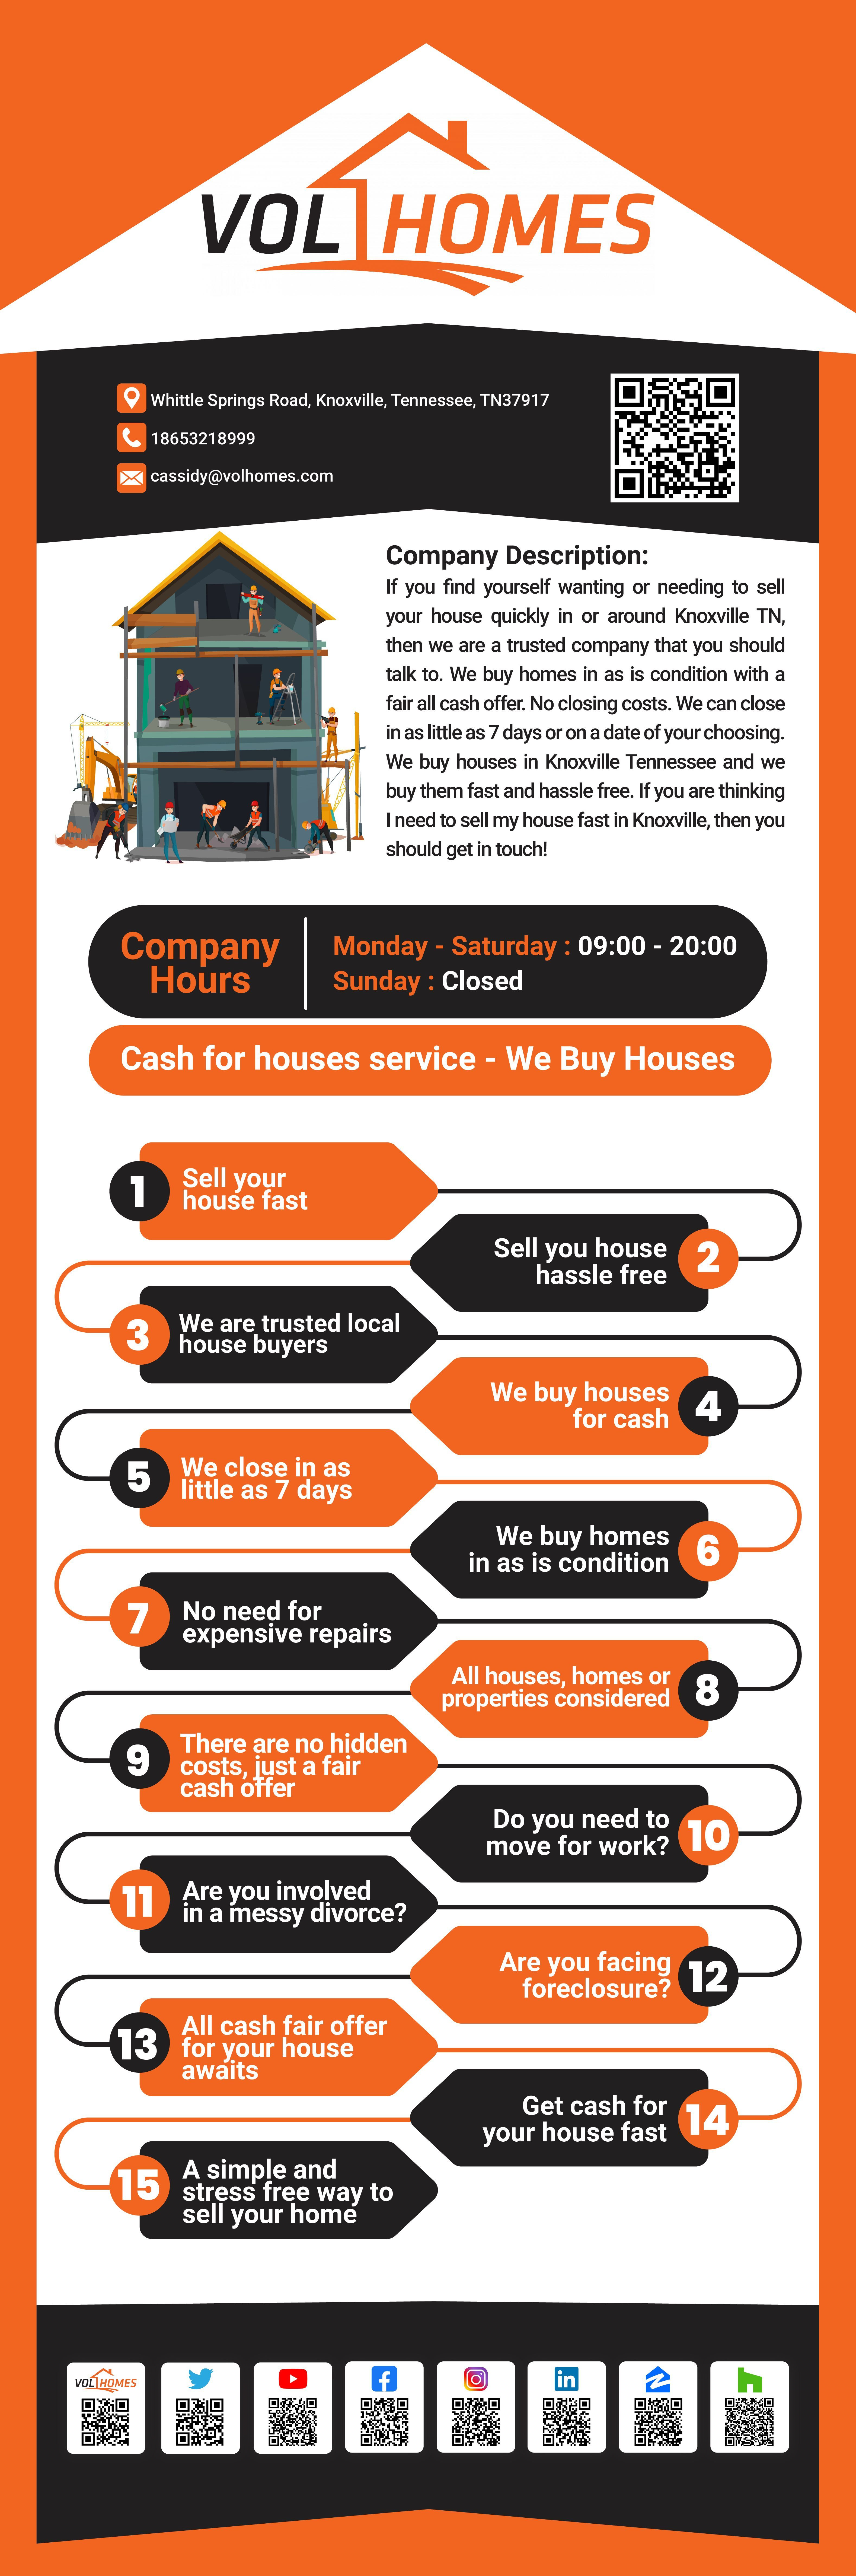 Vol Homes infographic